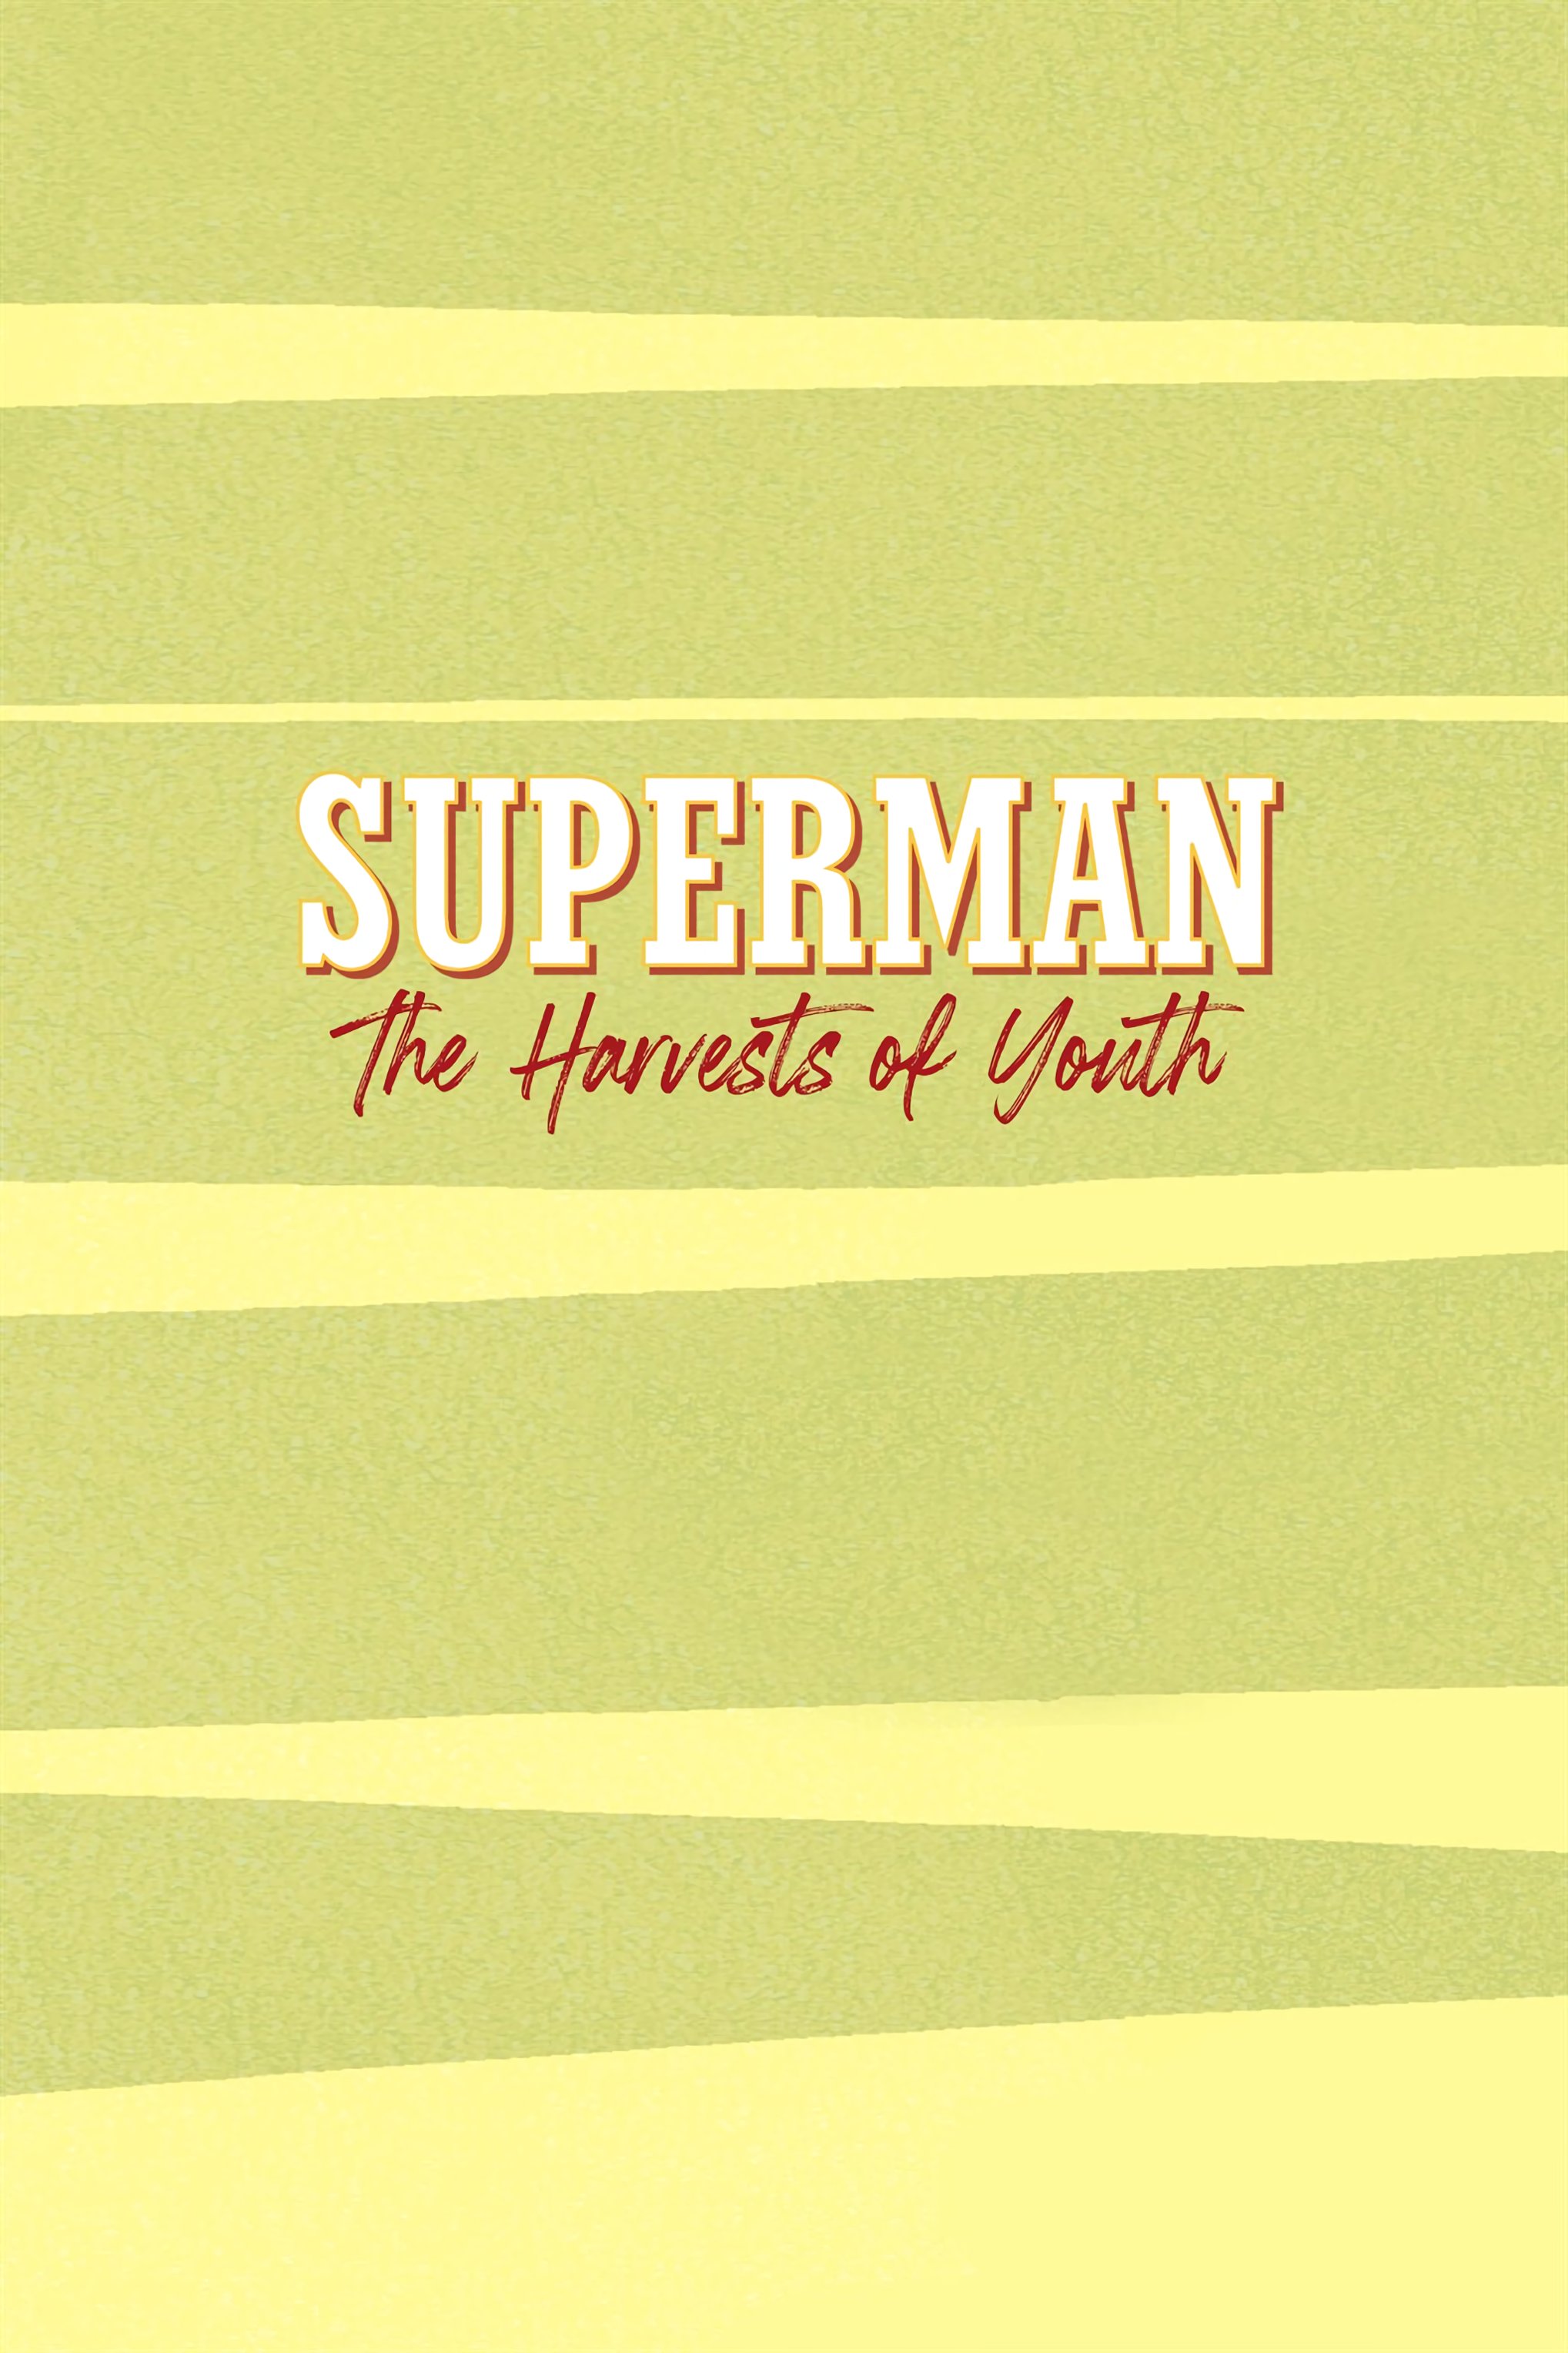 Read online Superman: The Harvests of Youth comic -  Issue # TPB (Part 1) - 2